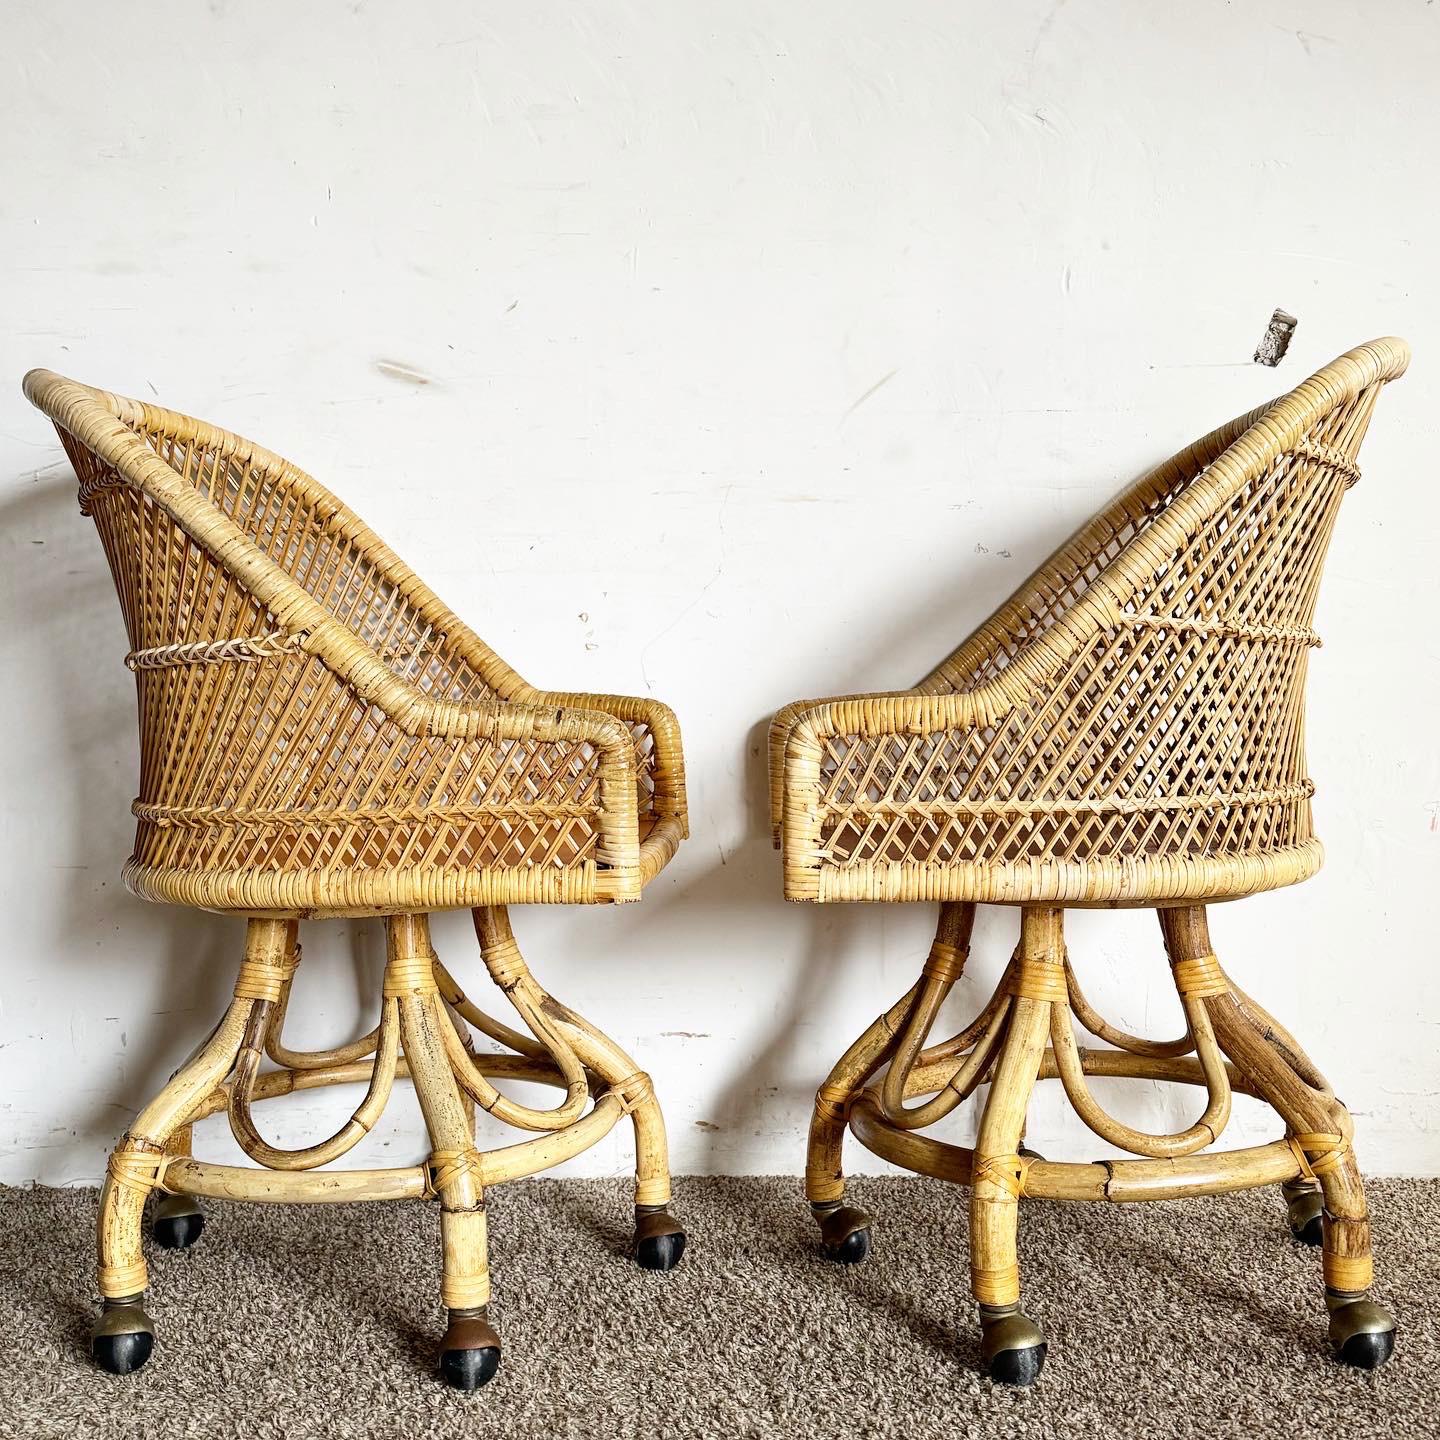 Bohemian Boho Chic Buri Rattan Bamboo Swivel Barrel Dining Chairs on Casters - Set of 4 For Sale